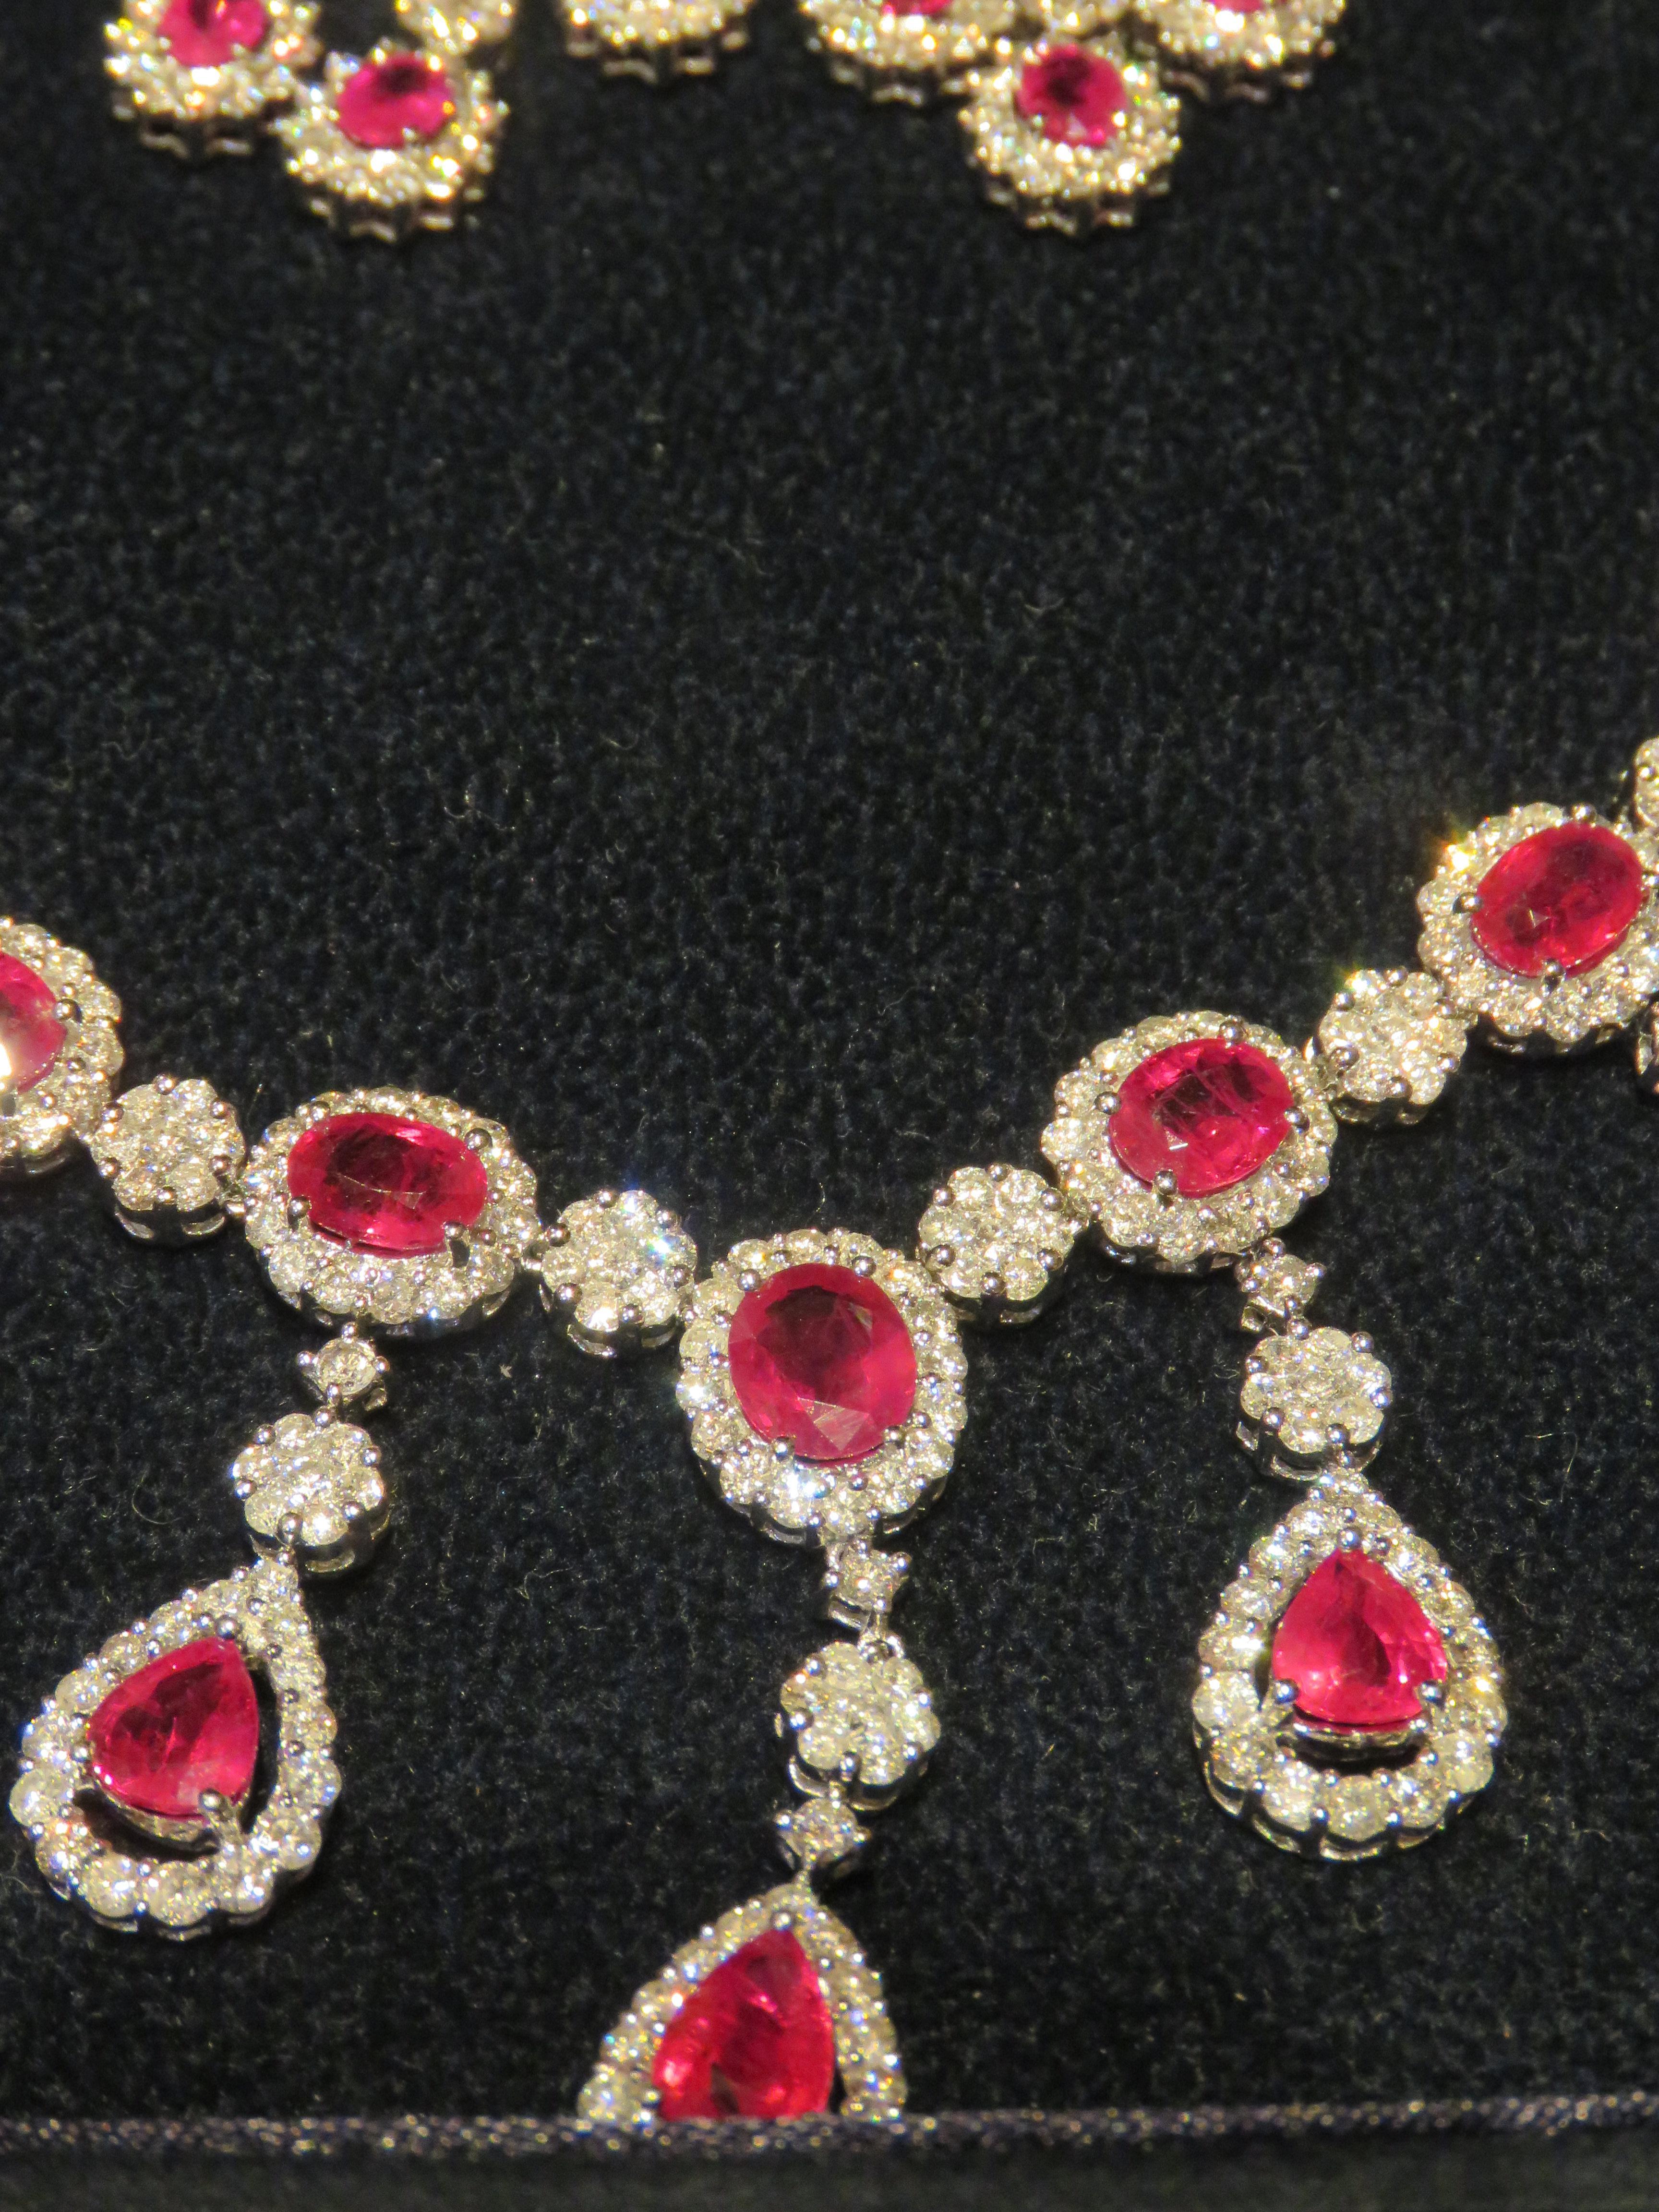 Mixed Cut Rare Important Fancy 18KT Gorgeous Ruby Diamond Necklace Earrings Ford Estate